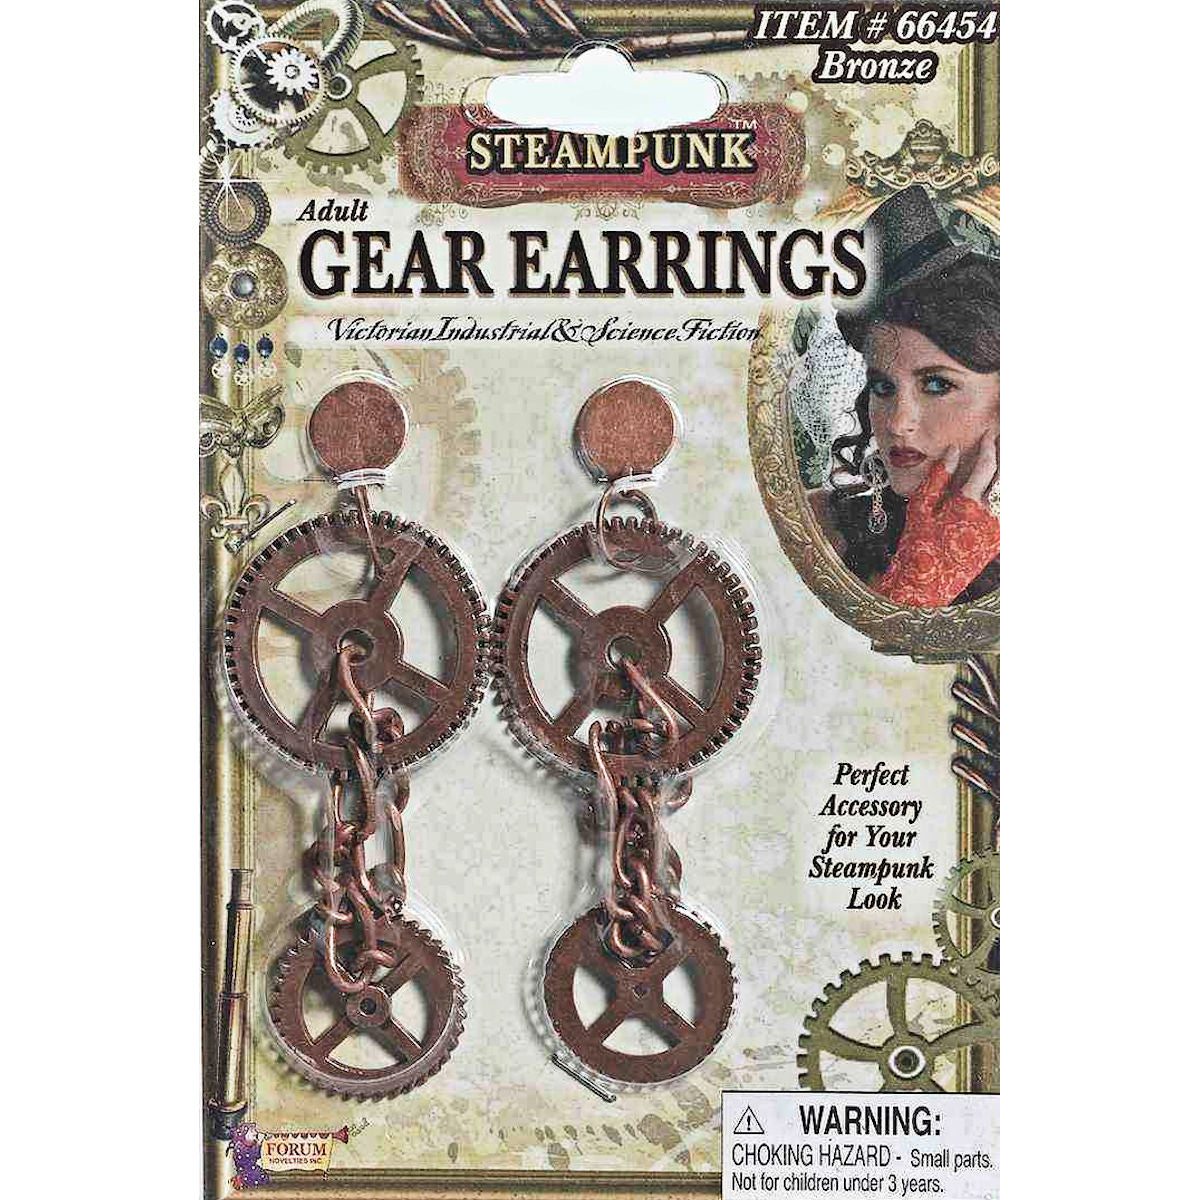 Steampunk Gear Earrings Victorian Industrial Science Fiction Apocalyptic costume